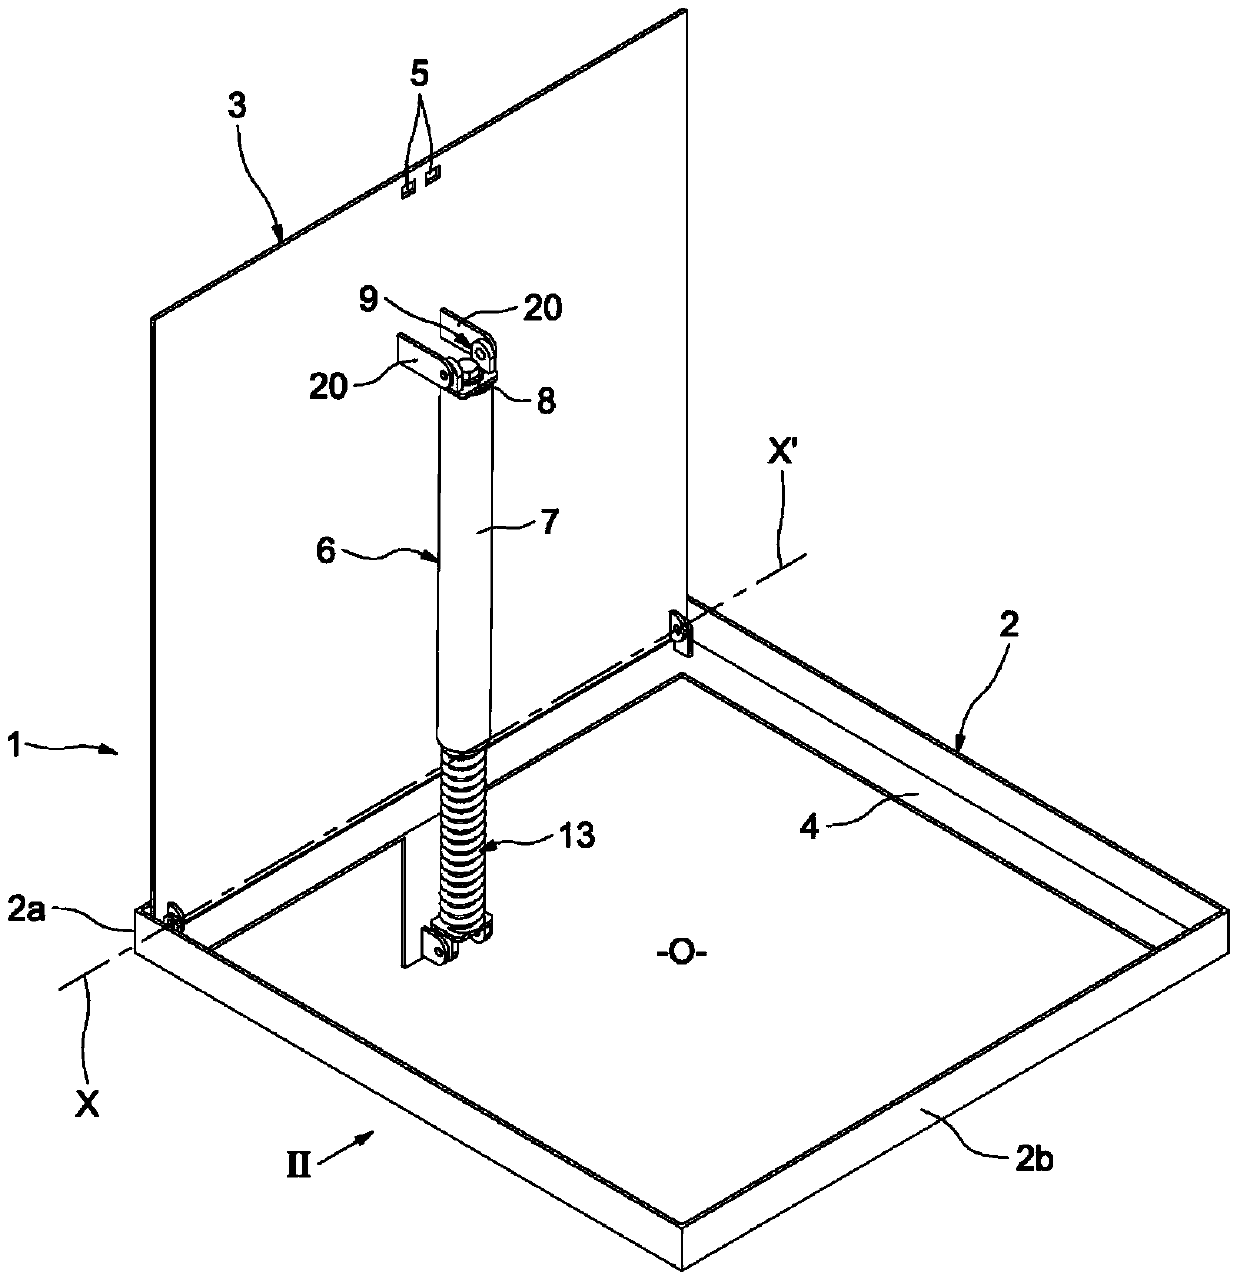 Device to assist the opening of covering element pivotably mounted relative to edge of frame